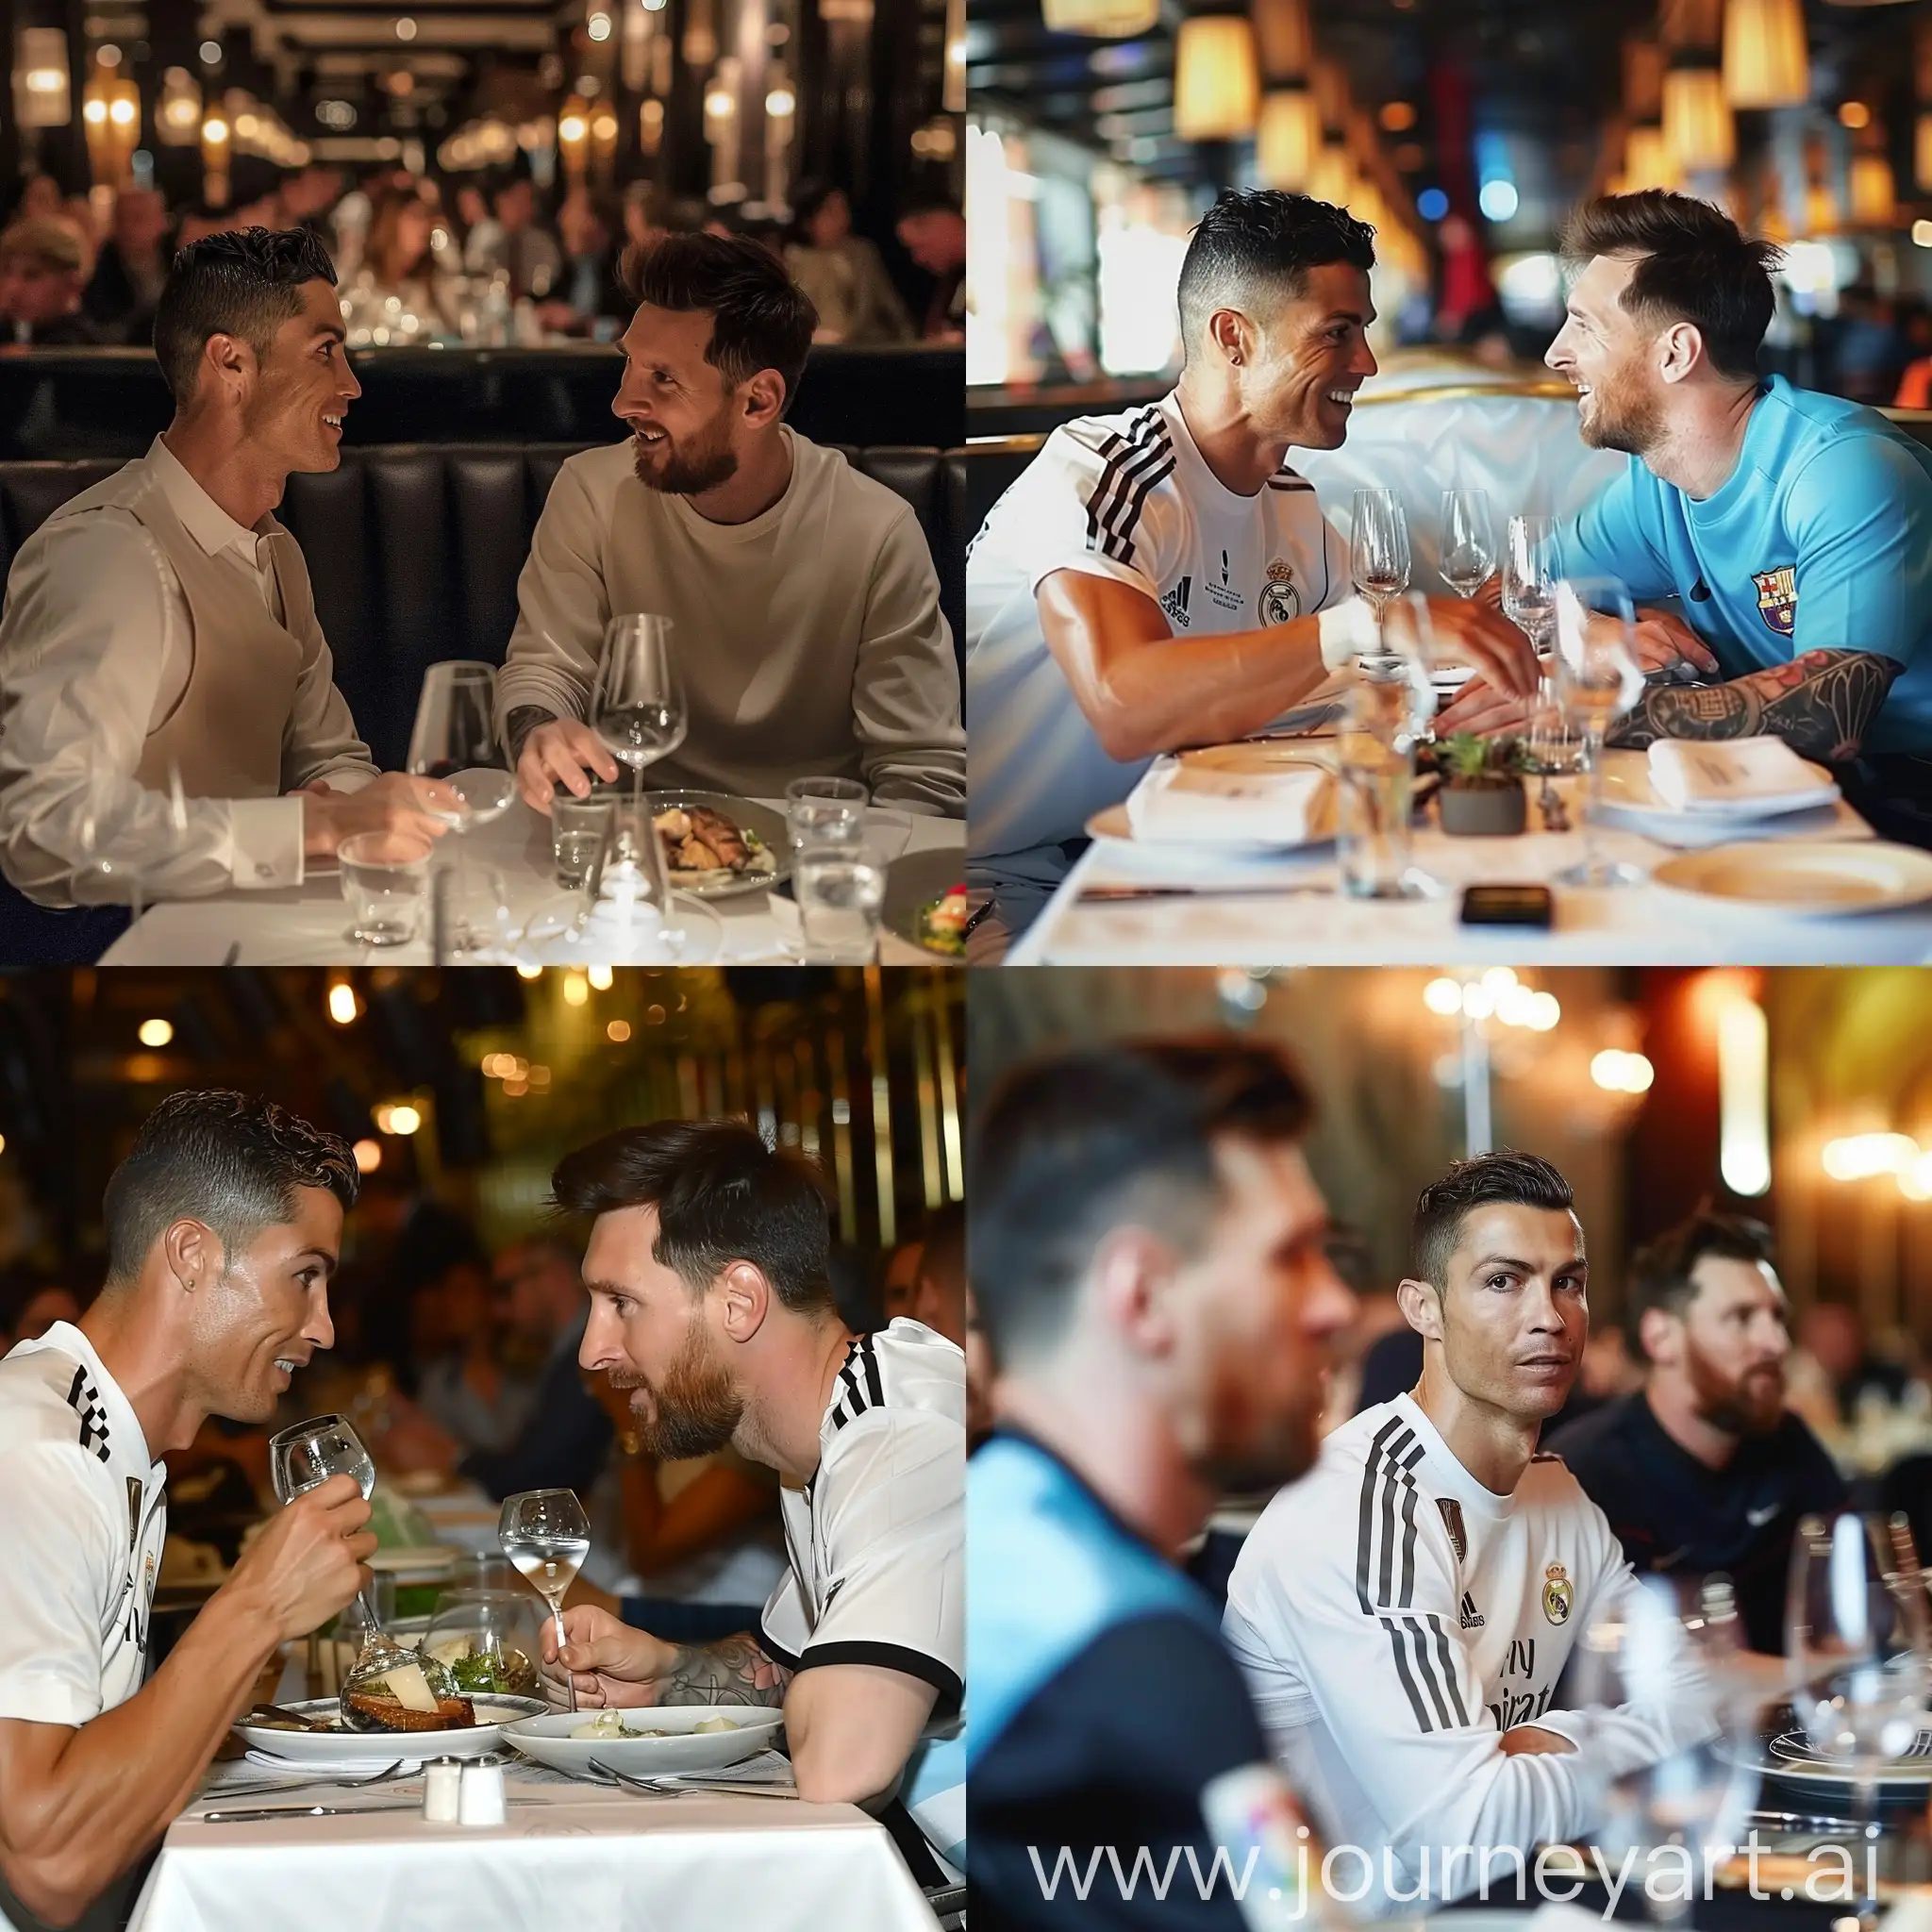 Cristiano Ronaldo having dinner in a luxury restaurant with lionel messi